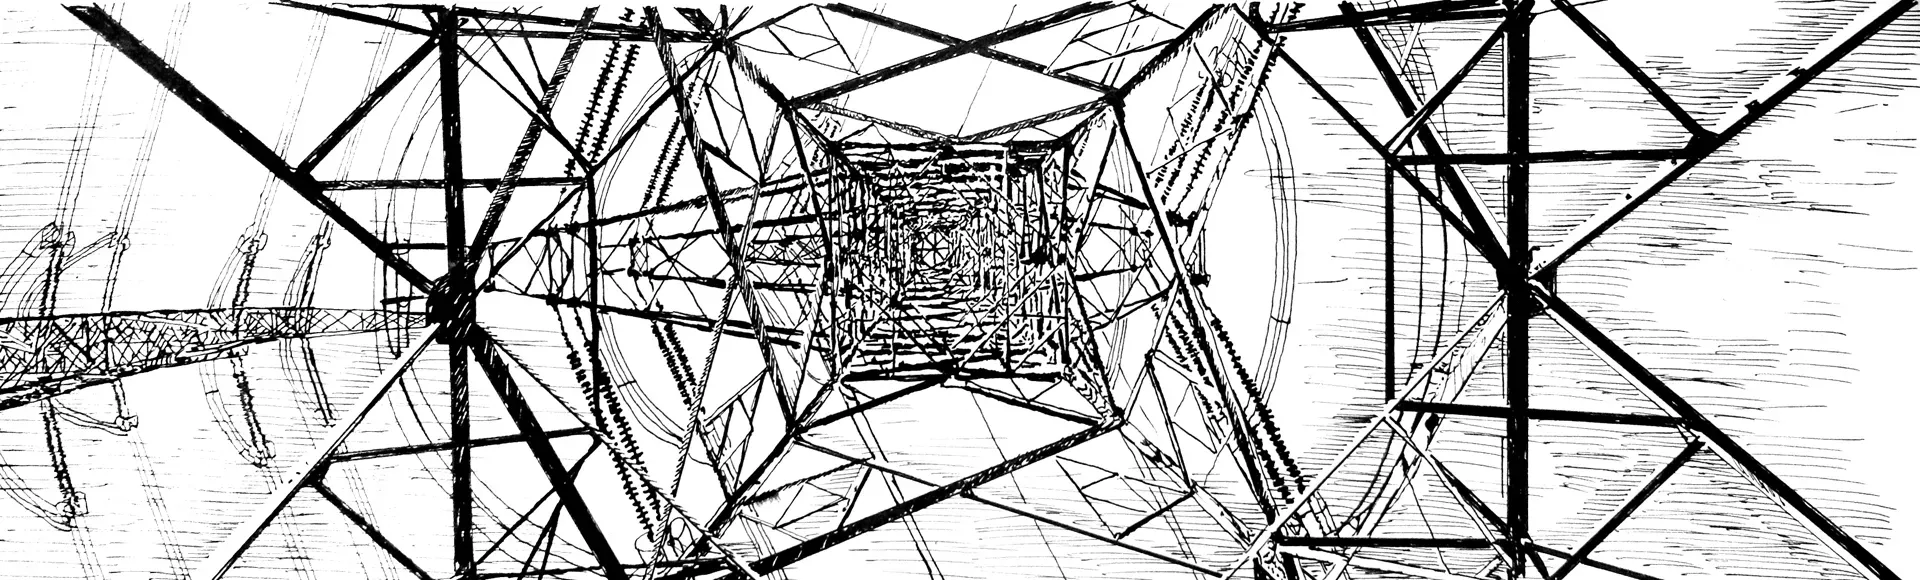 The view upwards in an electricity pylon leads to new perspectives.